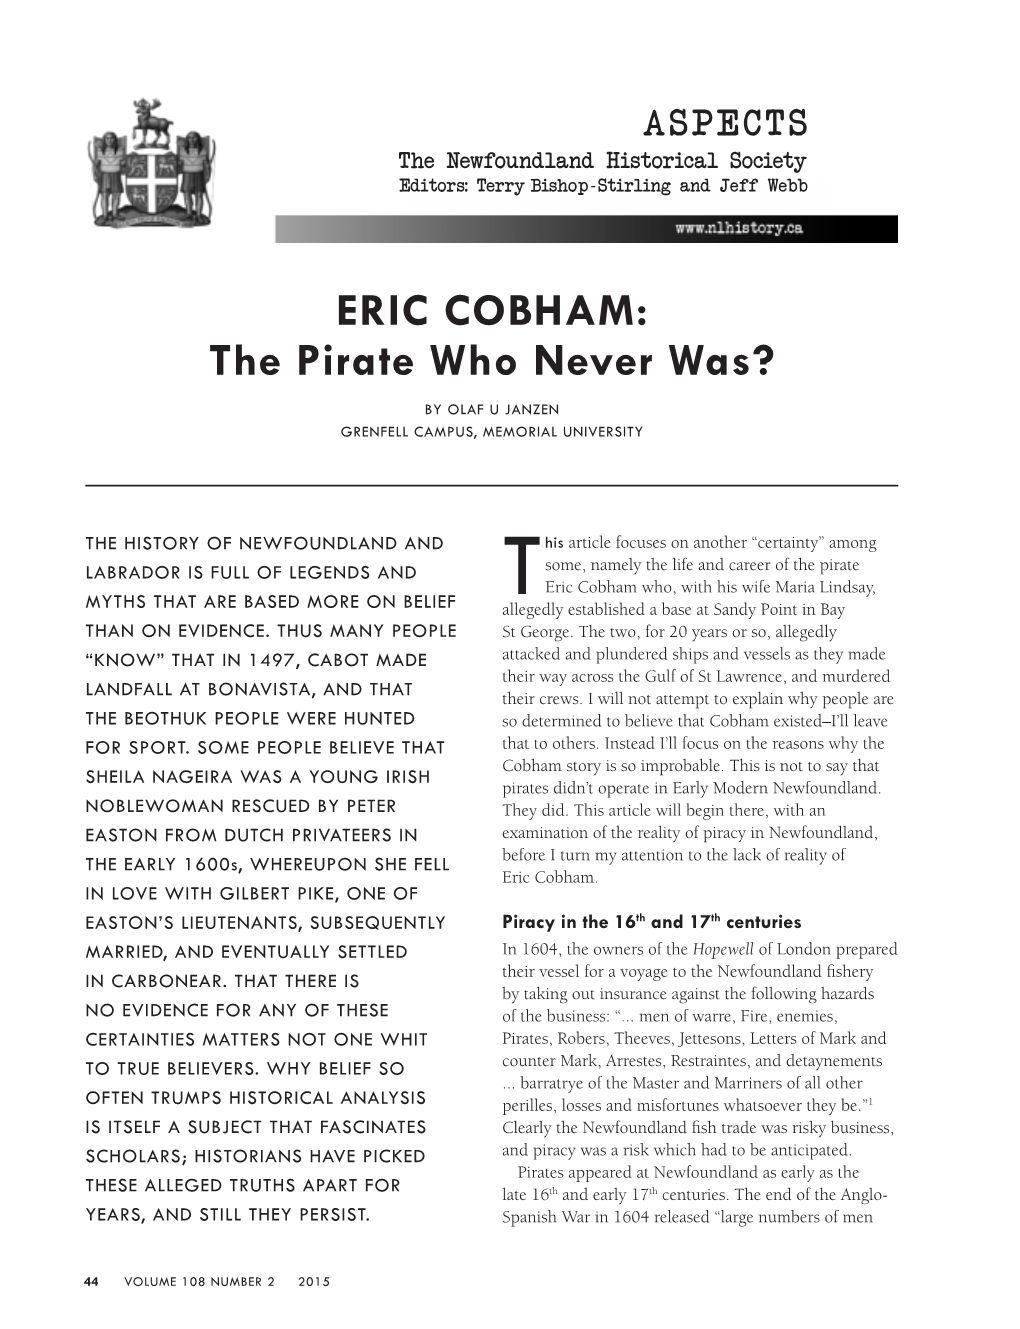 ERIC COBHAM: the Pirate Who Never Was?